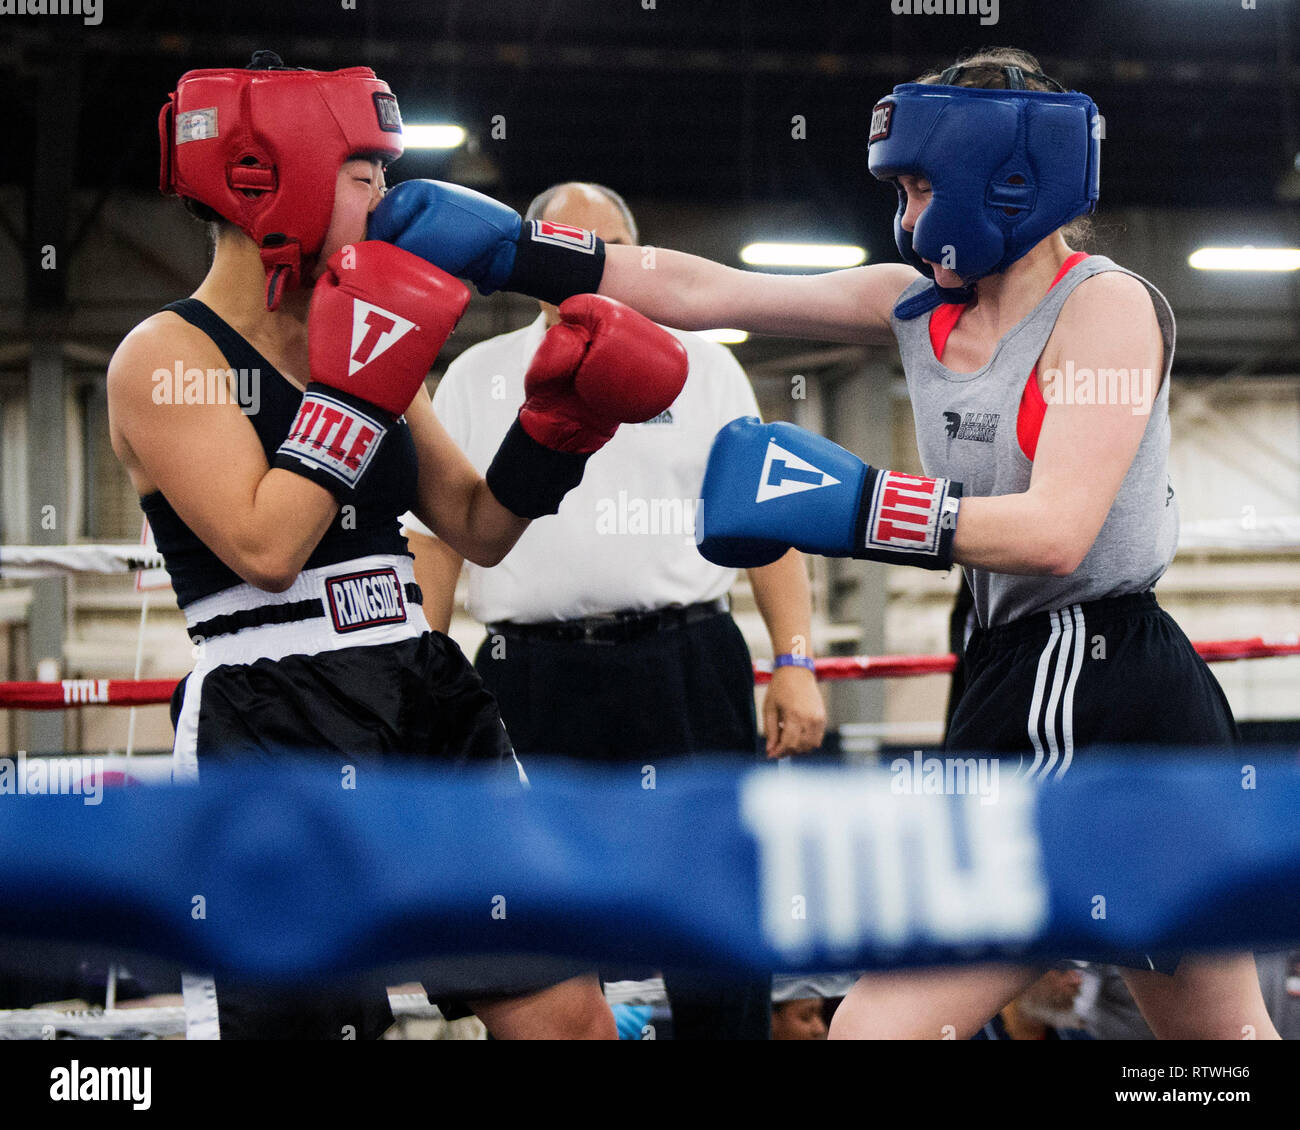 March 2, 2019: Natalie Mills of Illinois (right) hits Yurika Sano (left) with a right at the Arnold Sports Festival in Columbus, Ohio, USA. Brent Clark/Alamy Live News Stock Photo